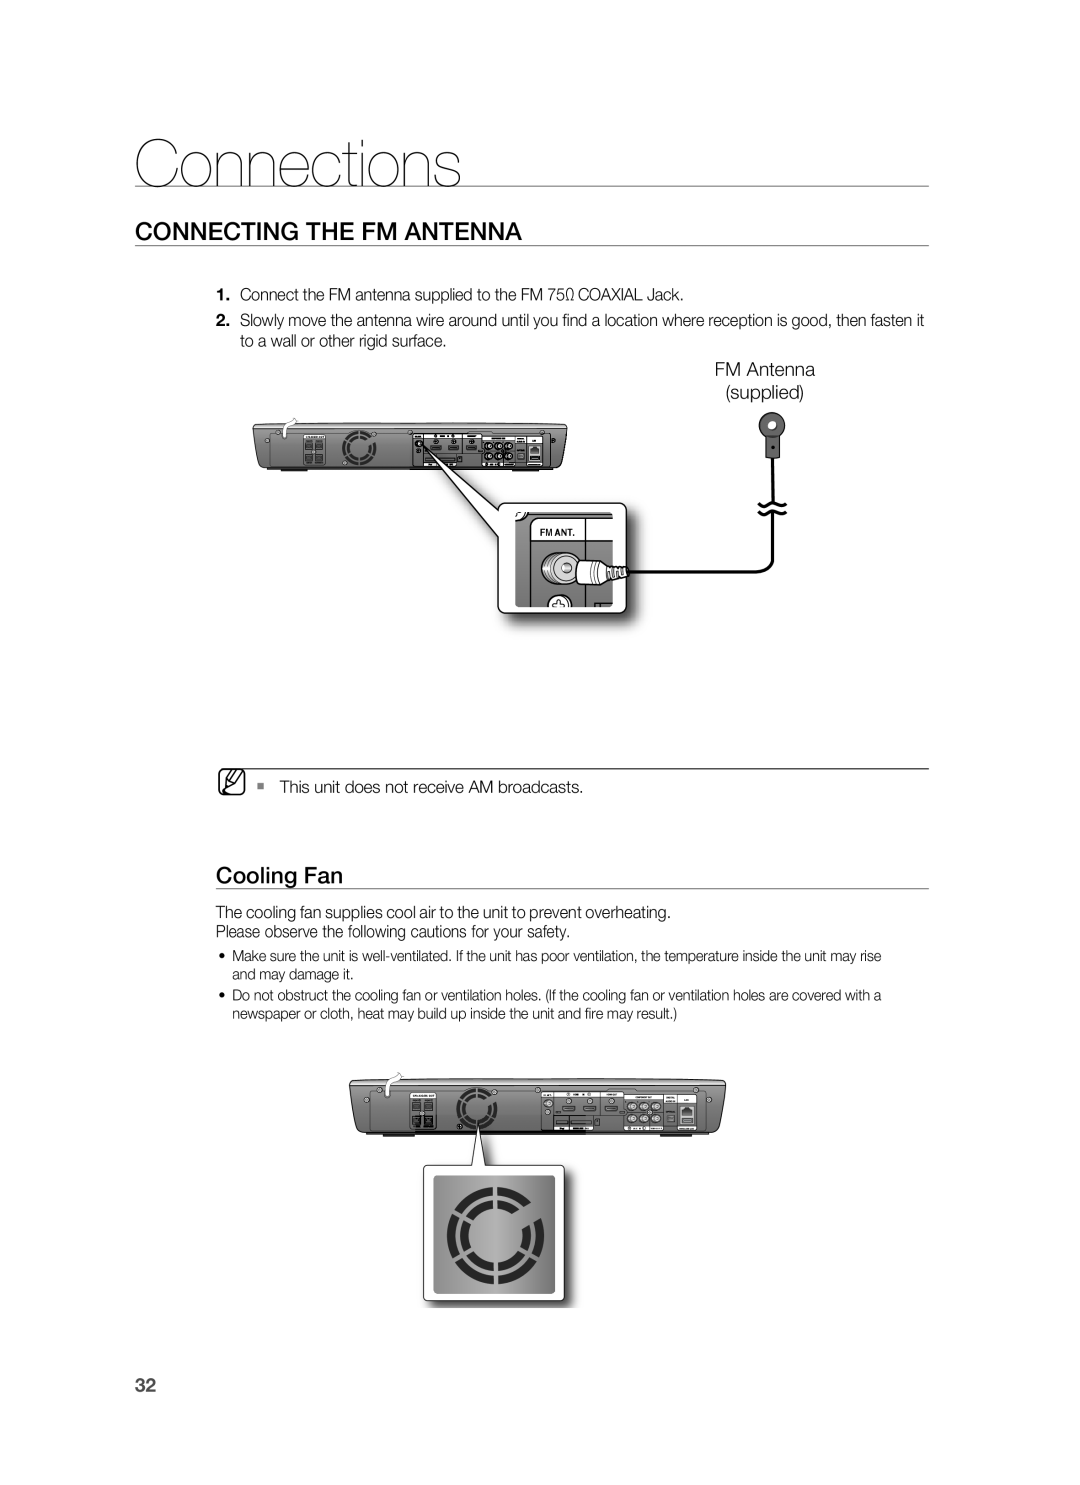 Samsung HT-BD3252 user manual Connecting The Fm Antenna, Cooling Fan, Connections 